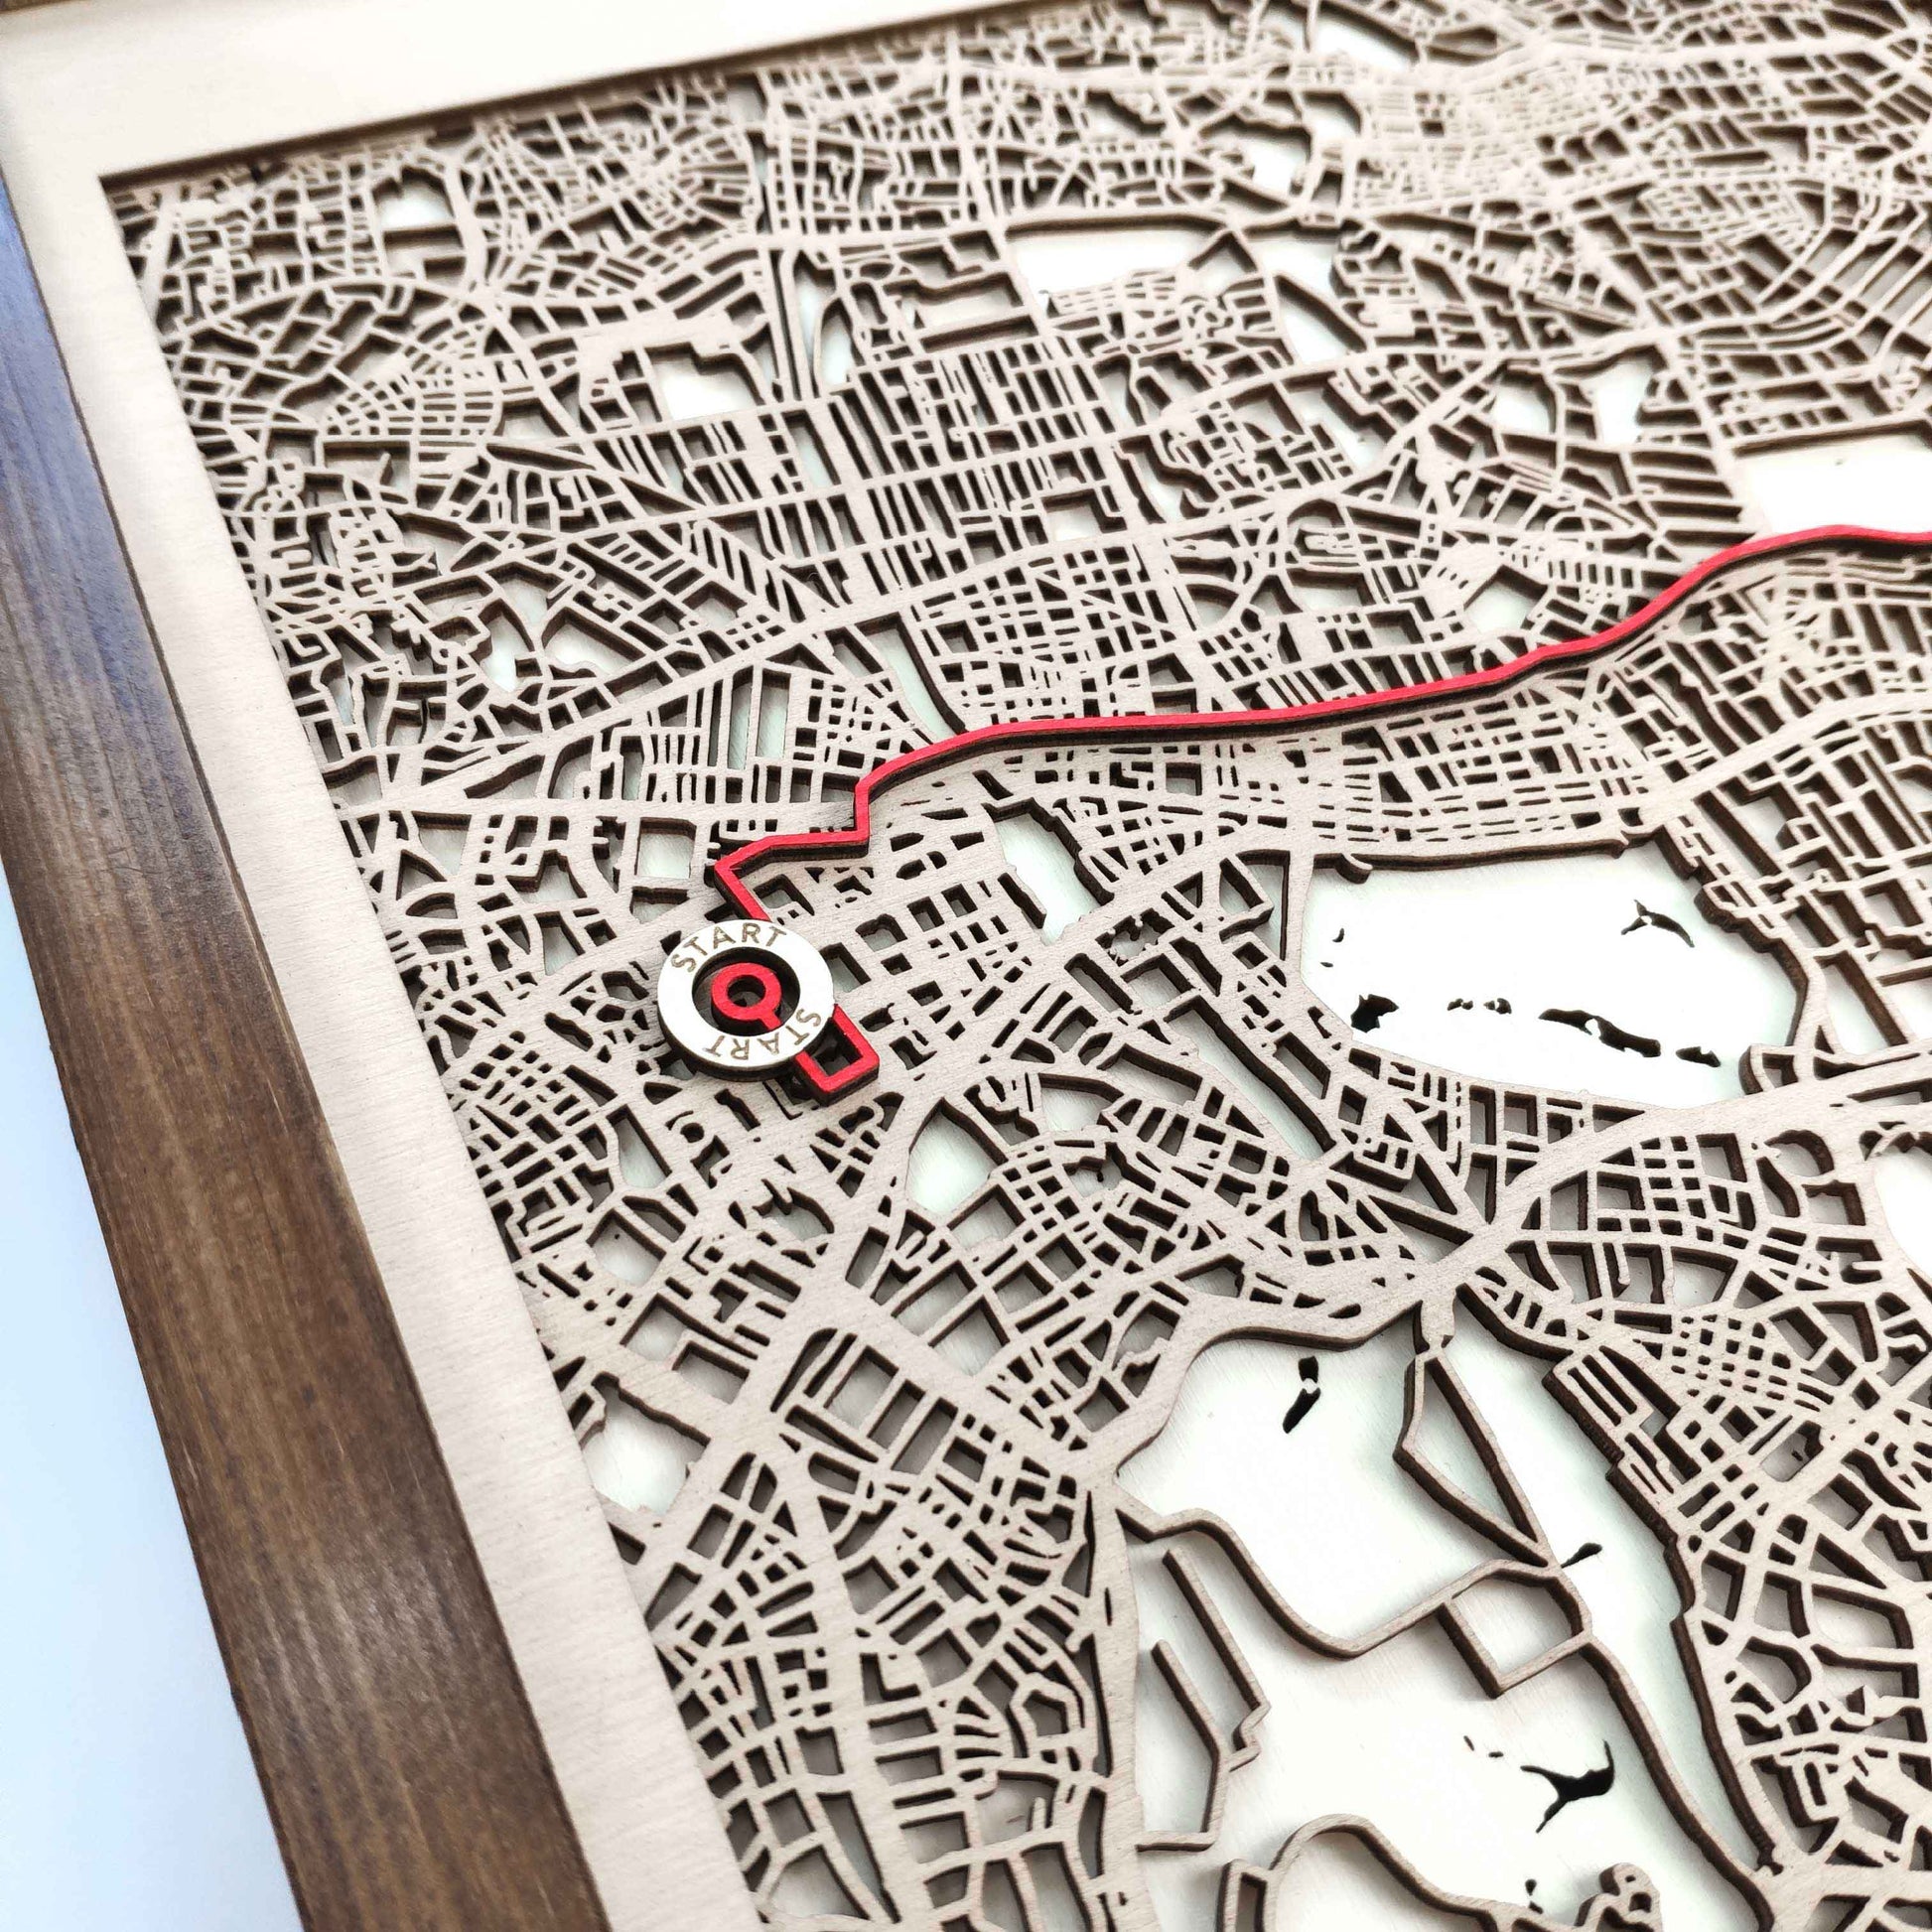 Tokyo Marathon Commemorative Wooden Route Map – Collector's Item by CityWood - Custom Wood Map Art - Unique Laser Cut Engraved - Anniversary Gift